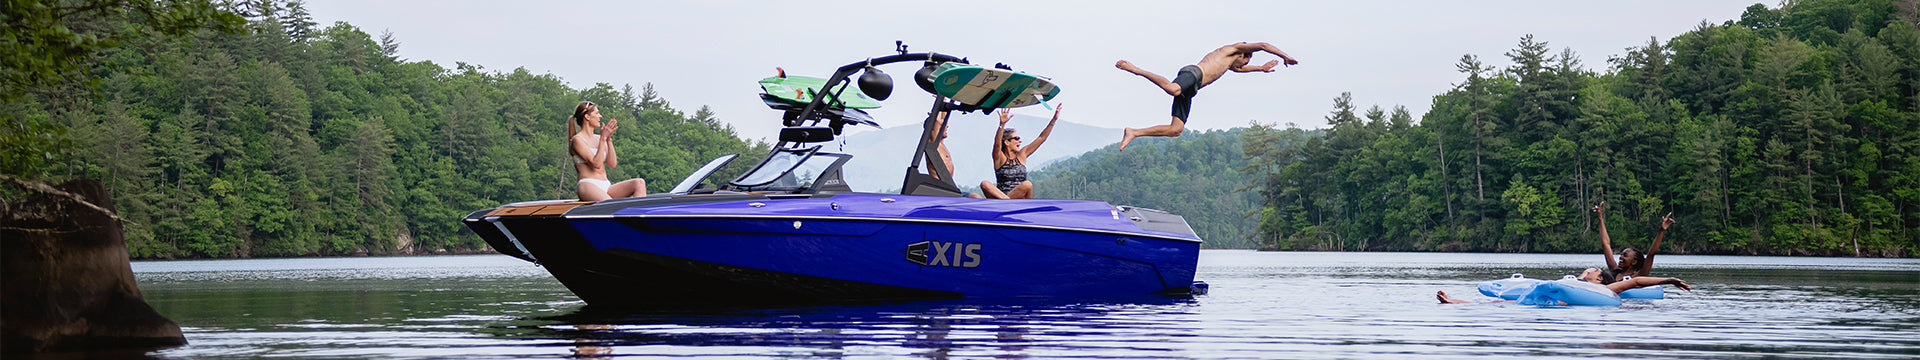 Axis Boat Parts & Accessories